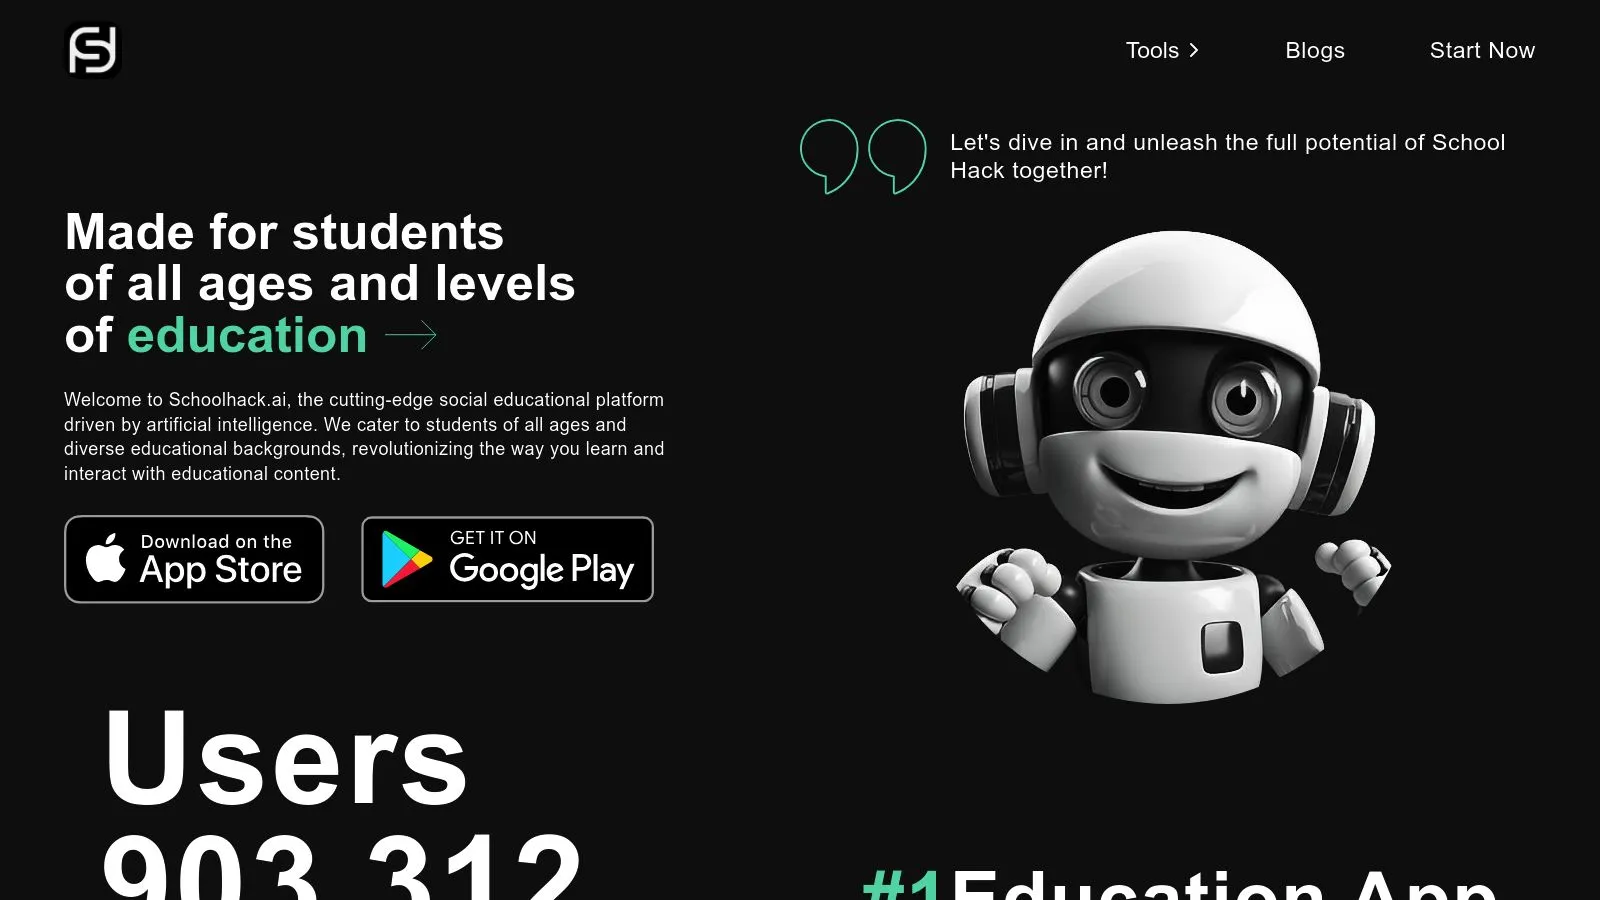 Featured image of Schoolhack.ai website